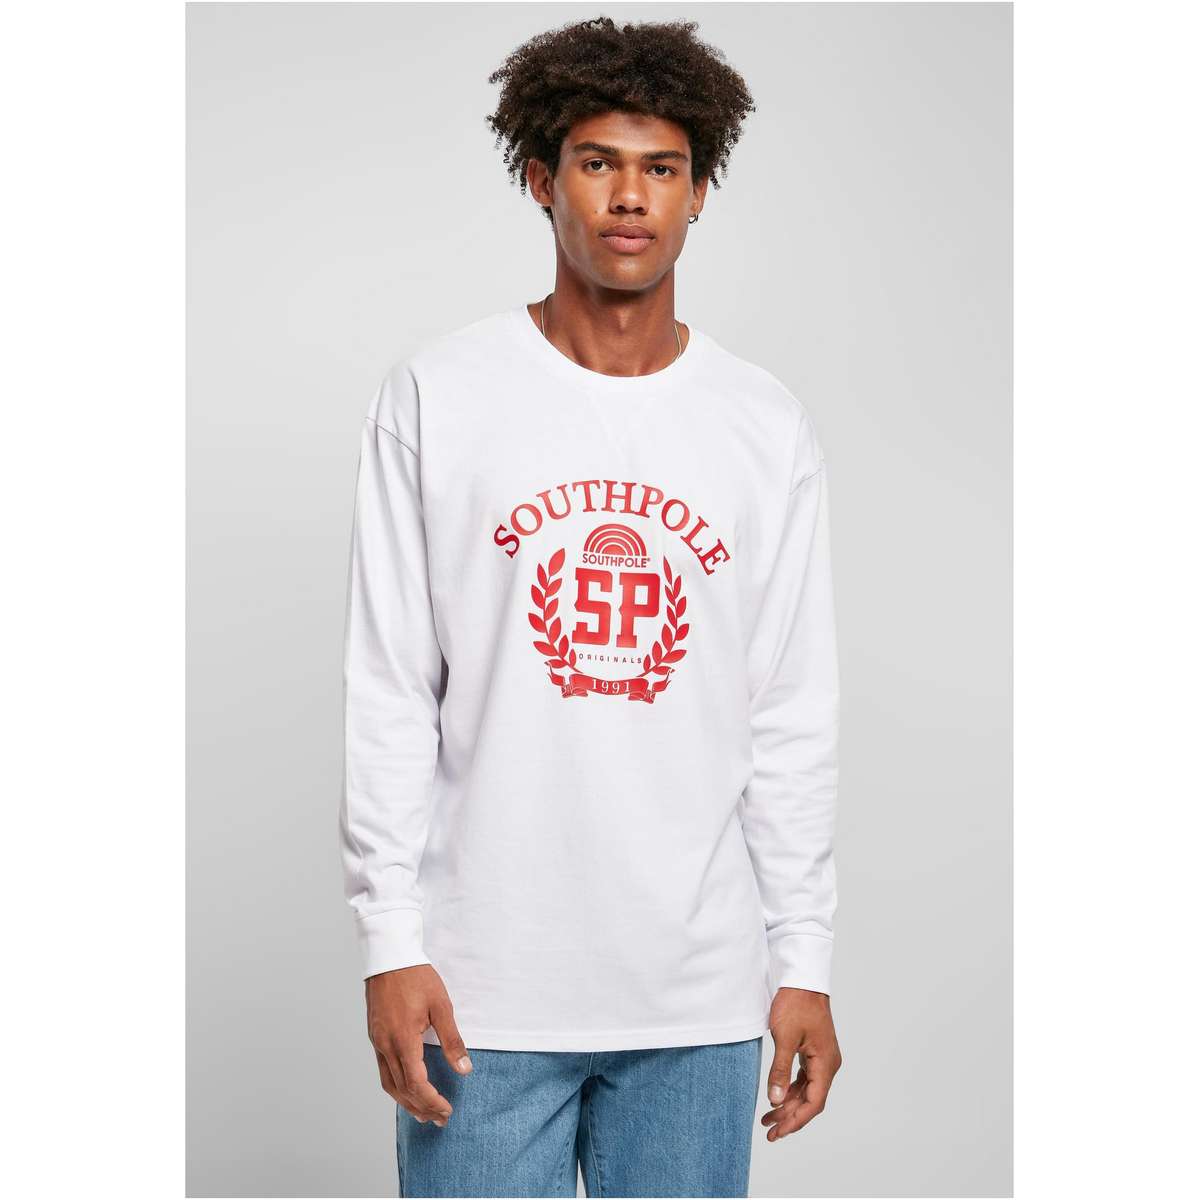 SOUTHPOLE COLLEGE LONGSLEEVE SP181 WHITE